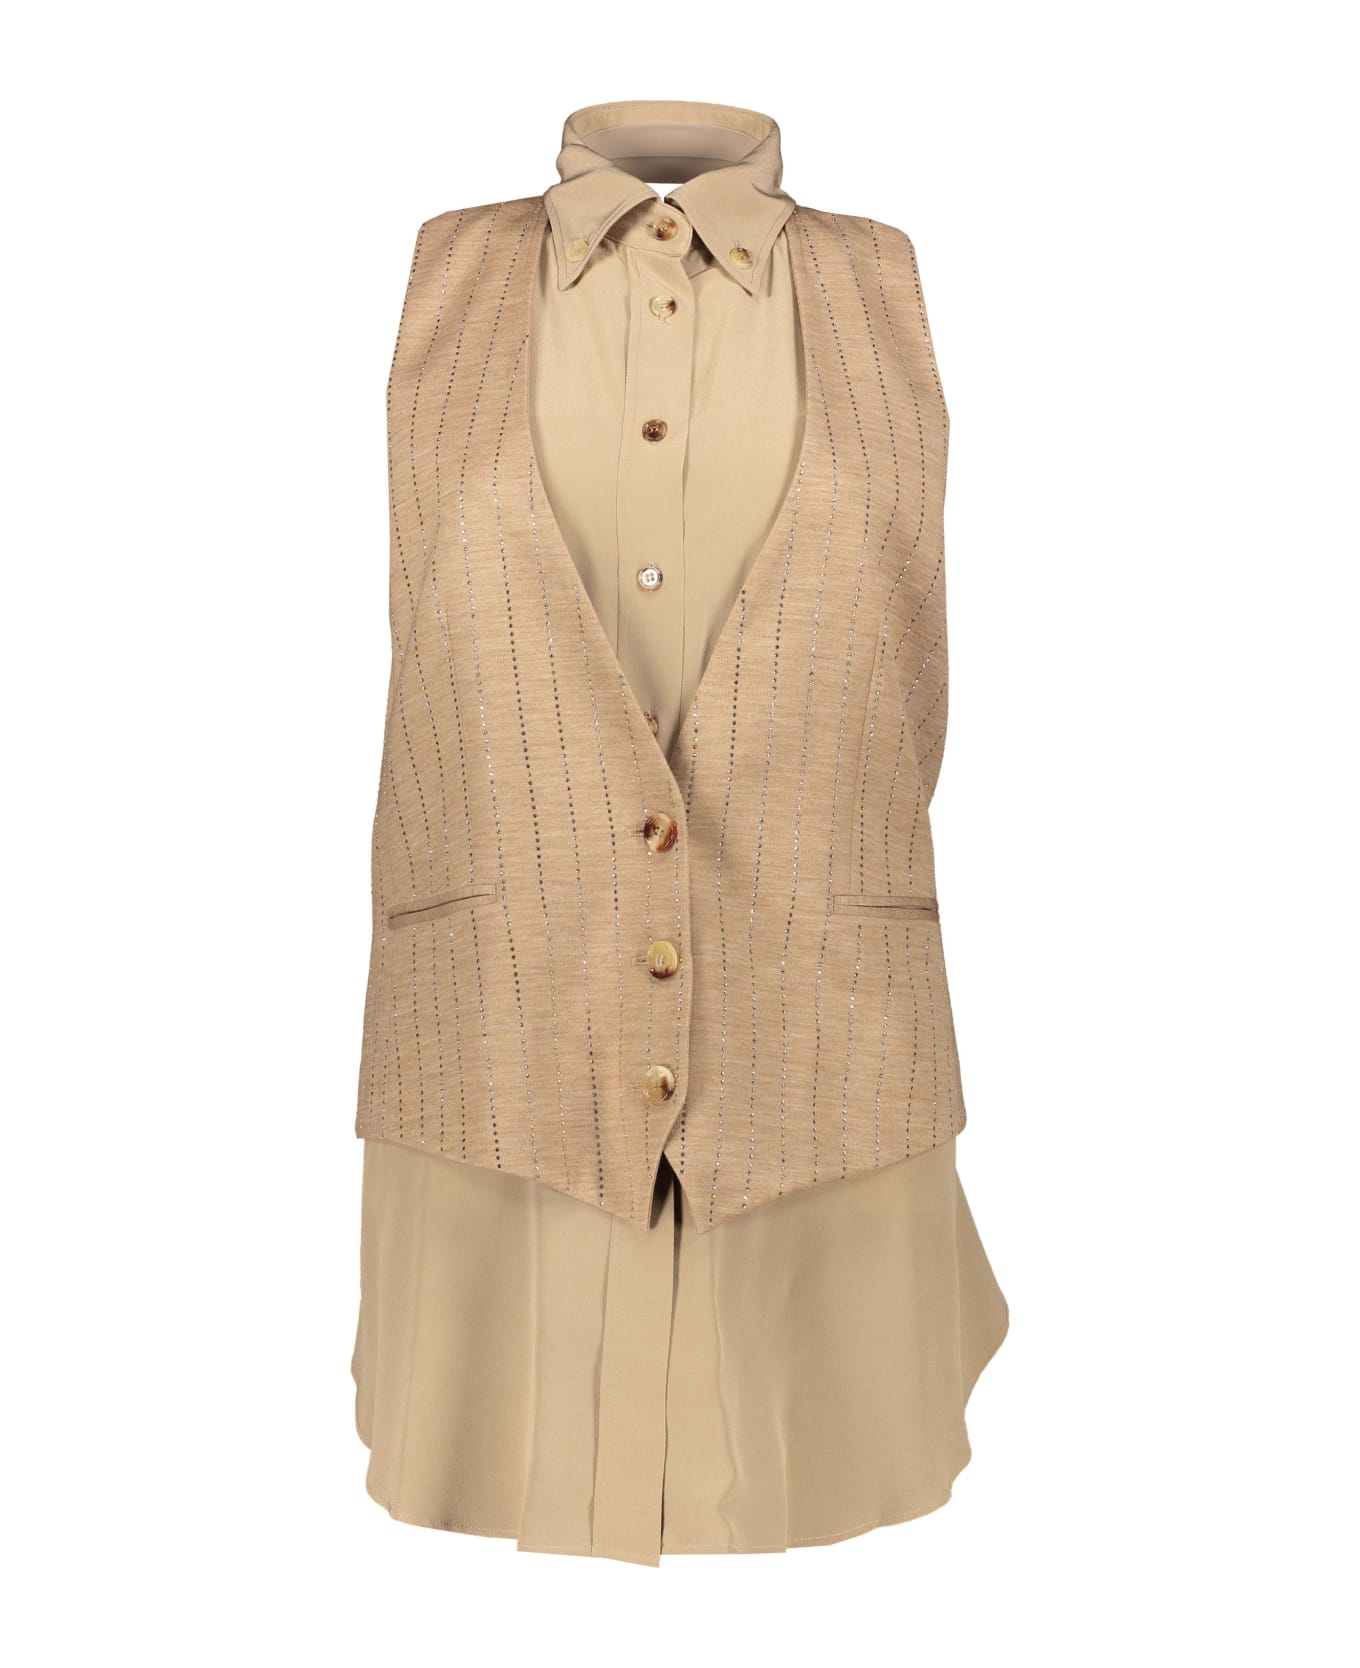 Burberry Single-breasted Vest - Beige ブレザー